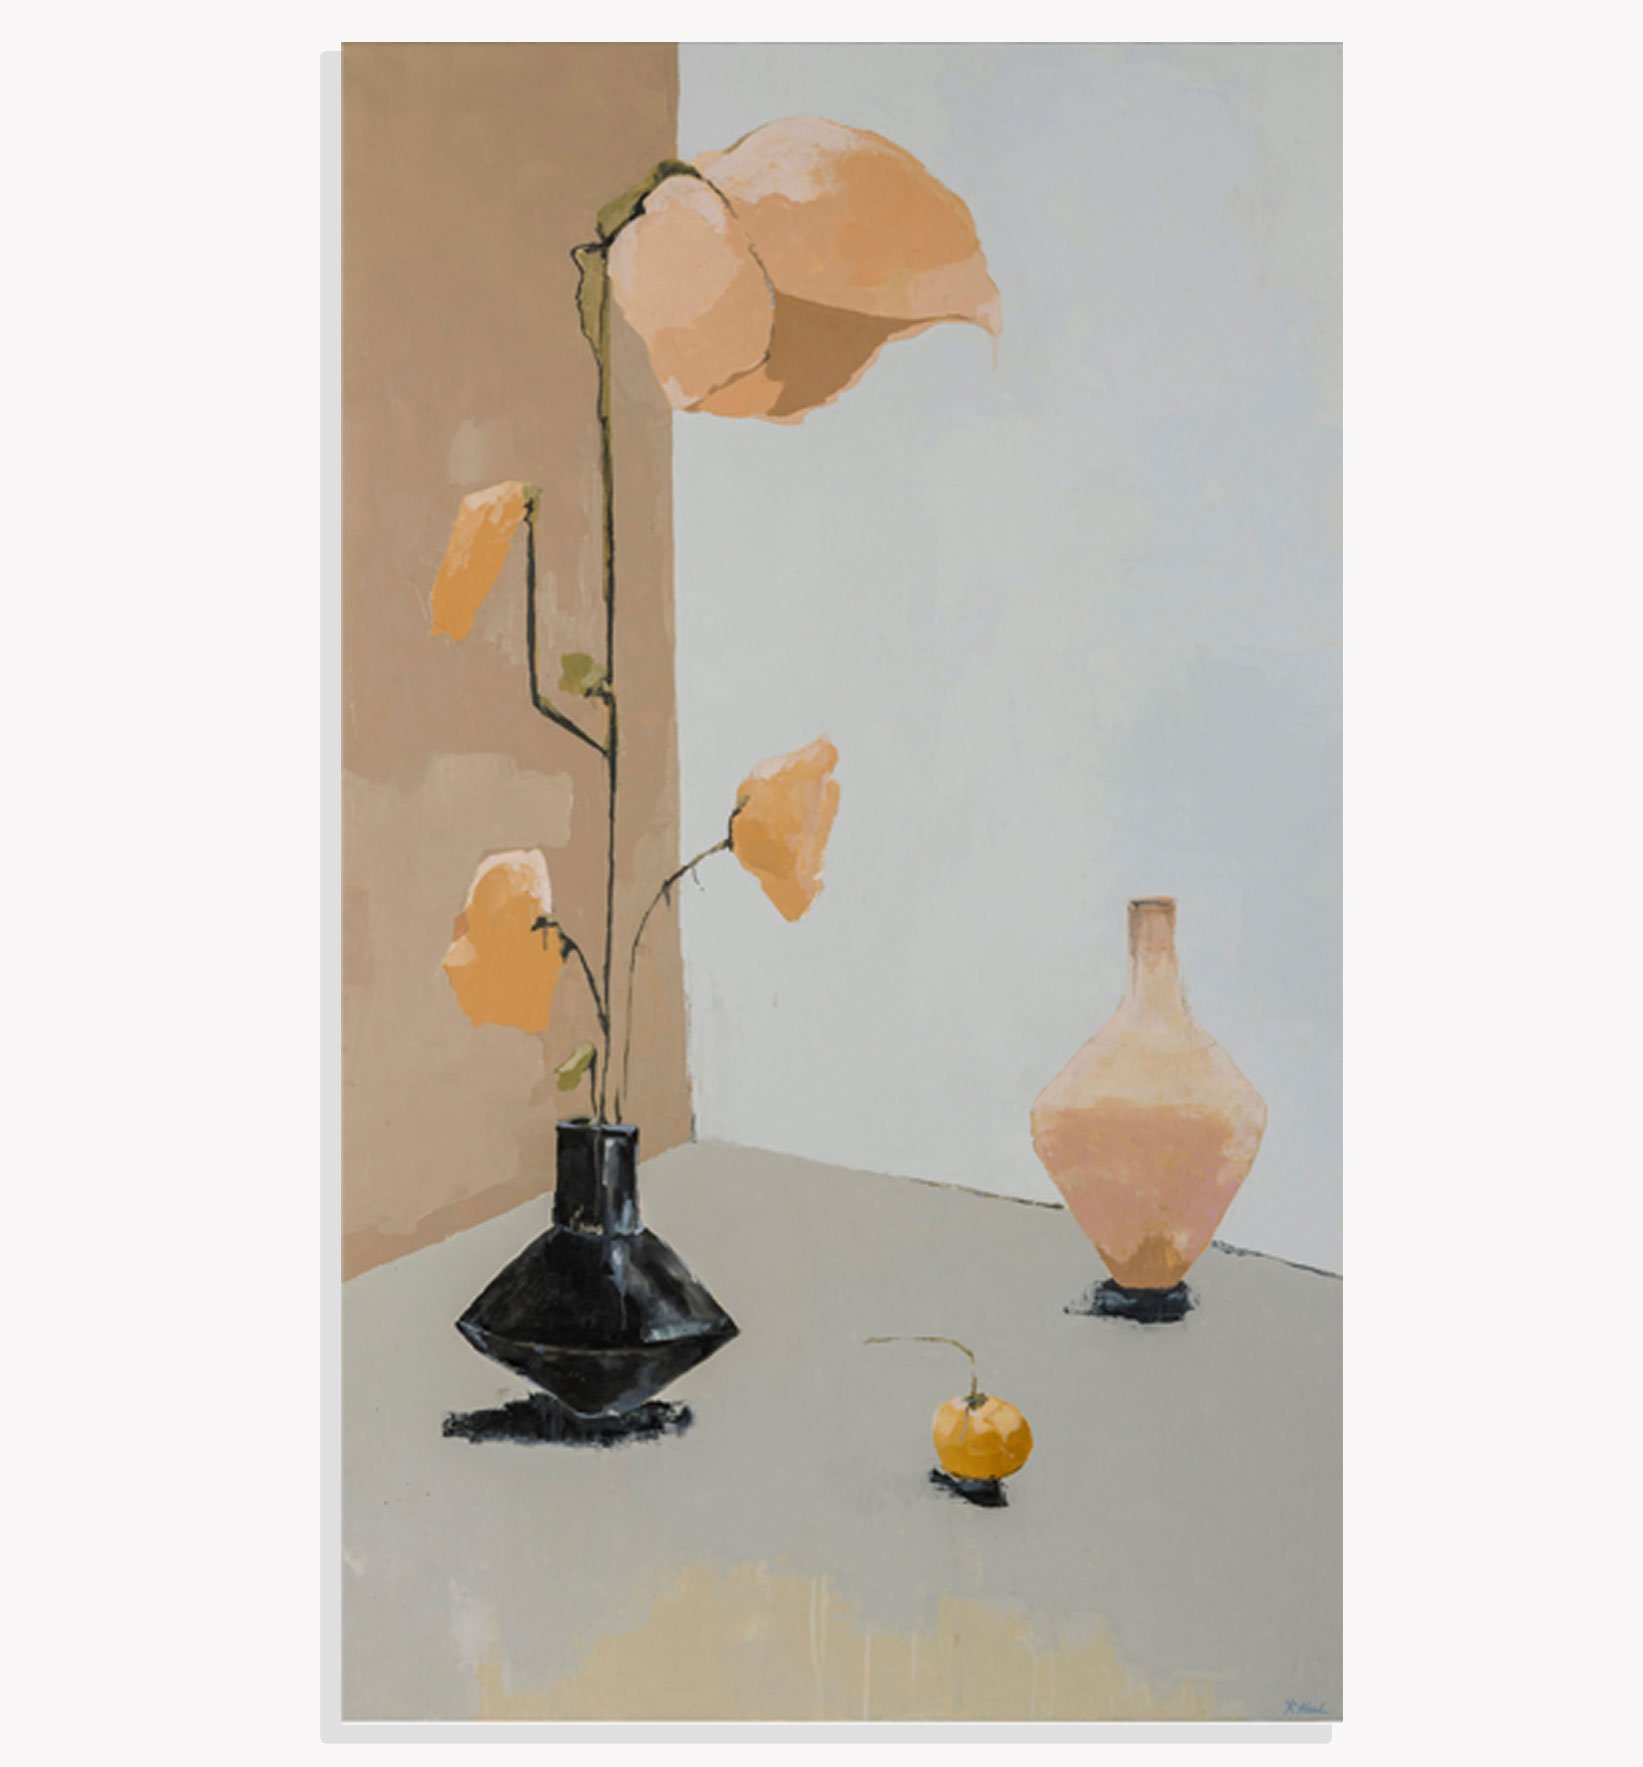   Pink Vase , Kristi Head 2018. Oil on canvas, 36 x 60 inches.  